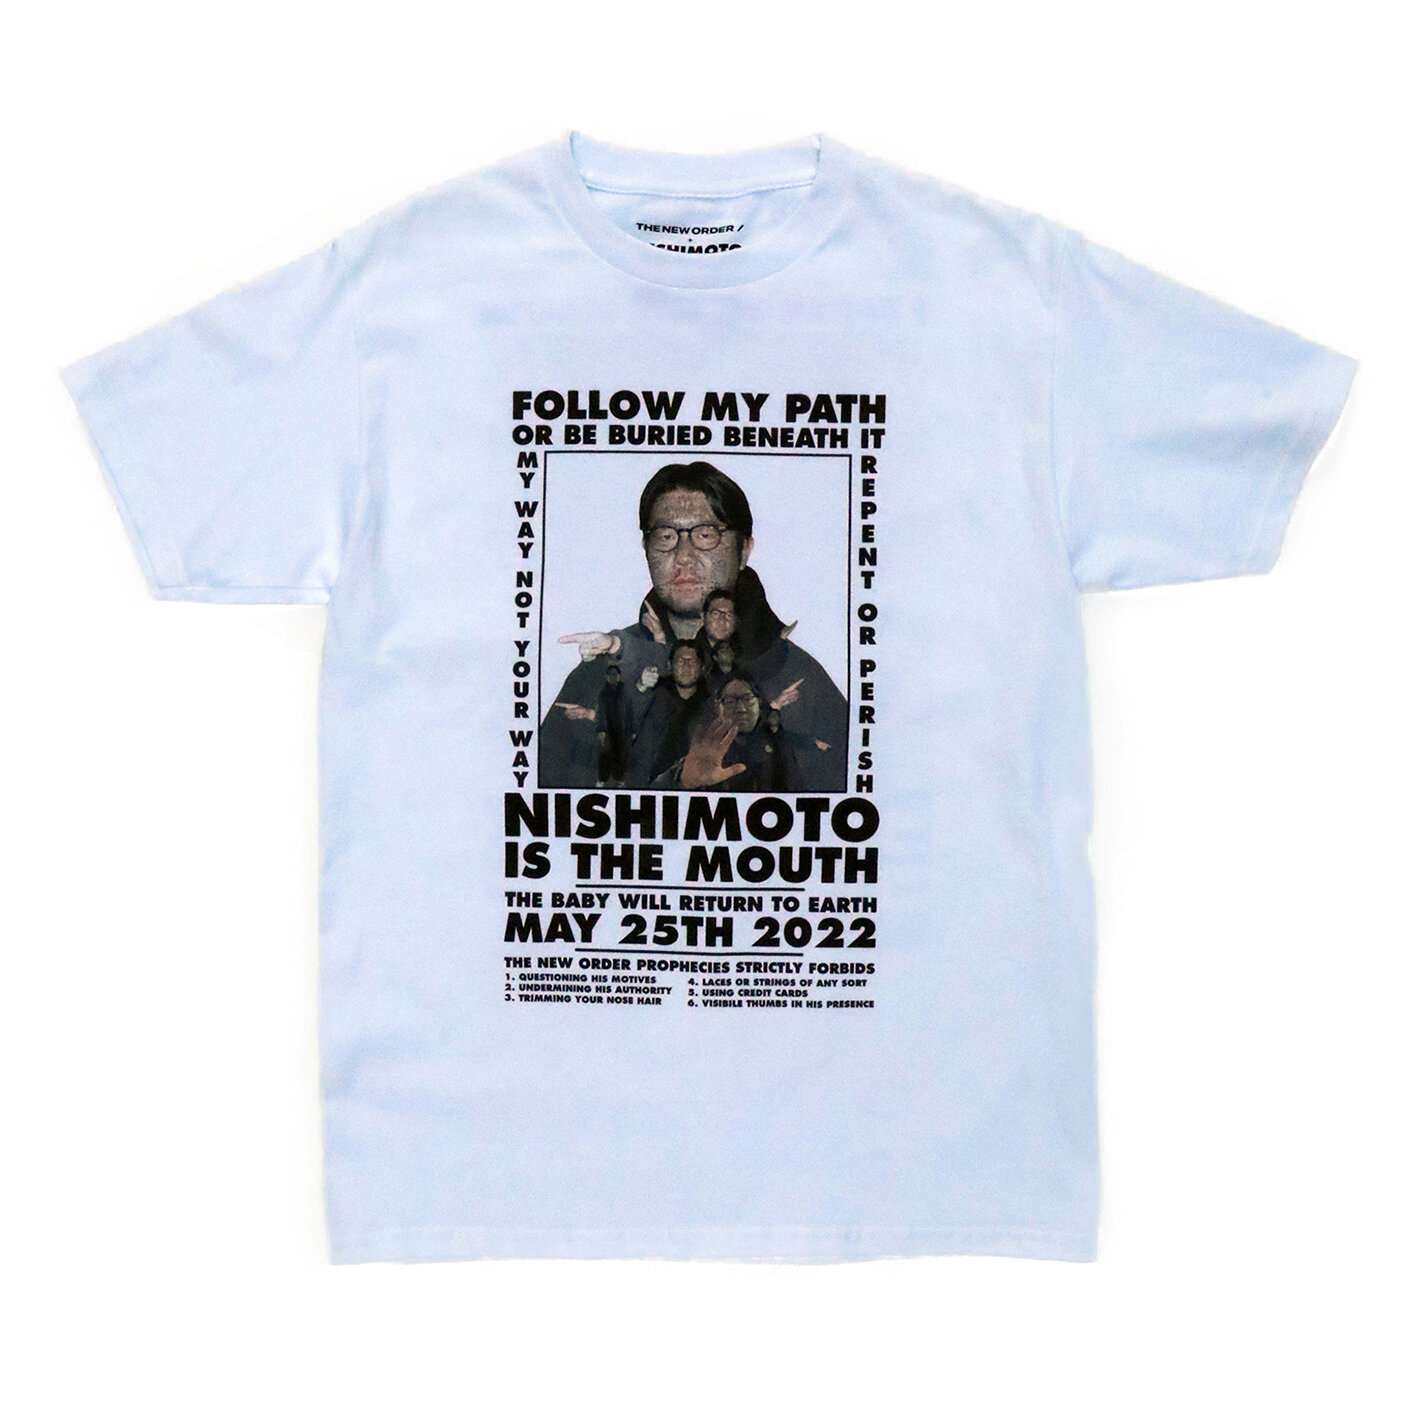 THE NEW ORDER + NISHIMOTO IS THE MOUTH 'PROPHECIES' T-SHIRT — THE